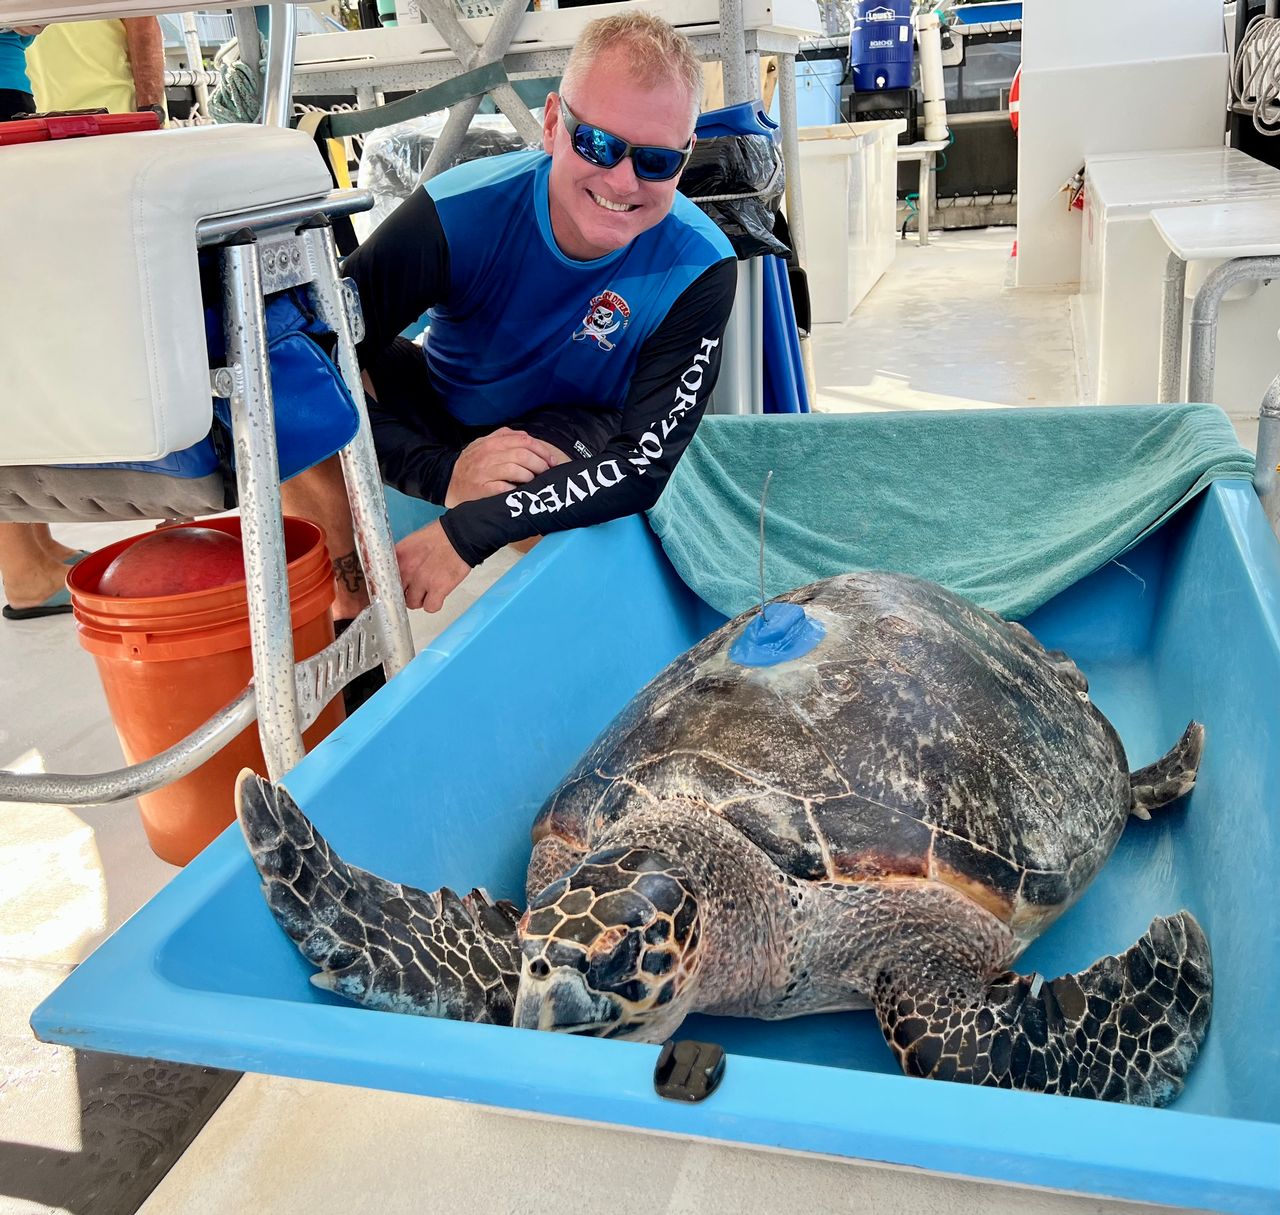 Dawson led the 2022 rescue of Harris, a 175-pound pregnant sea turtle who had a weighted fishing lure snagged between her neck and a fin. After treatment at the Turtle Hospital, Dawson oversaw her release. Photo: JoNell Modys